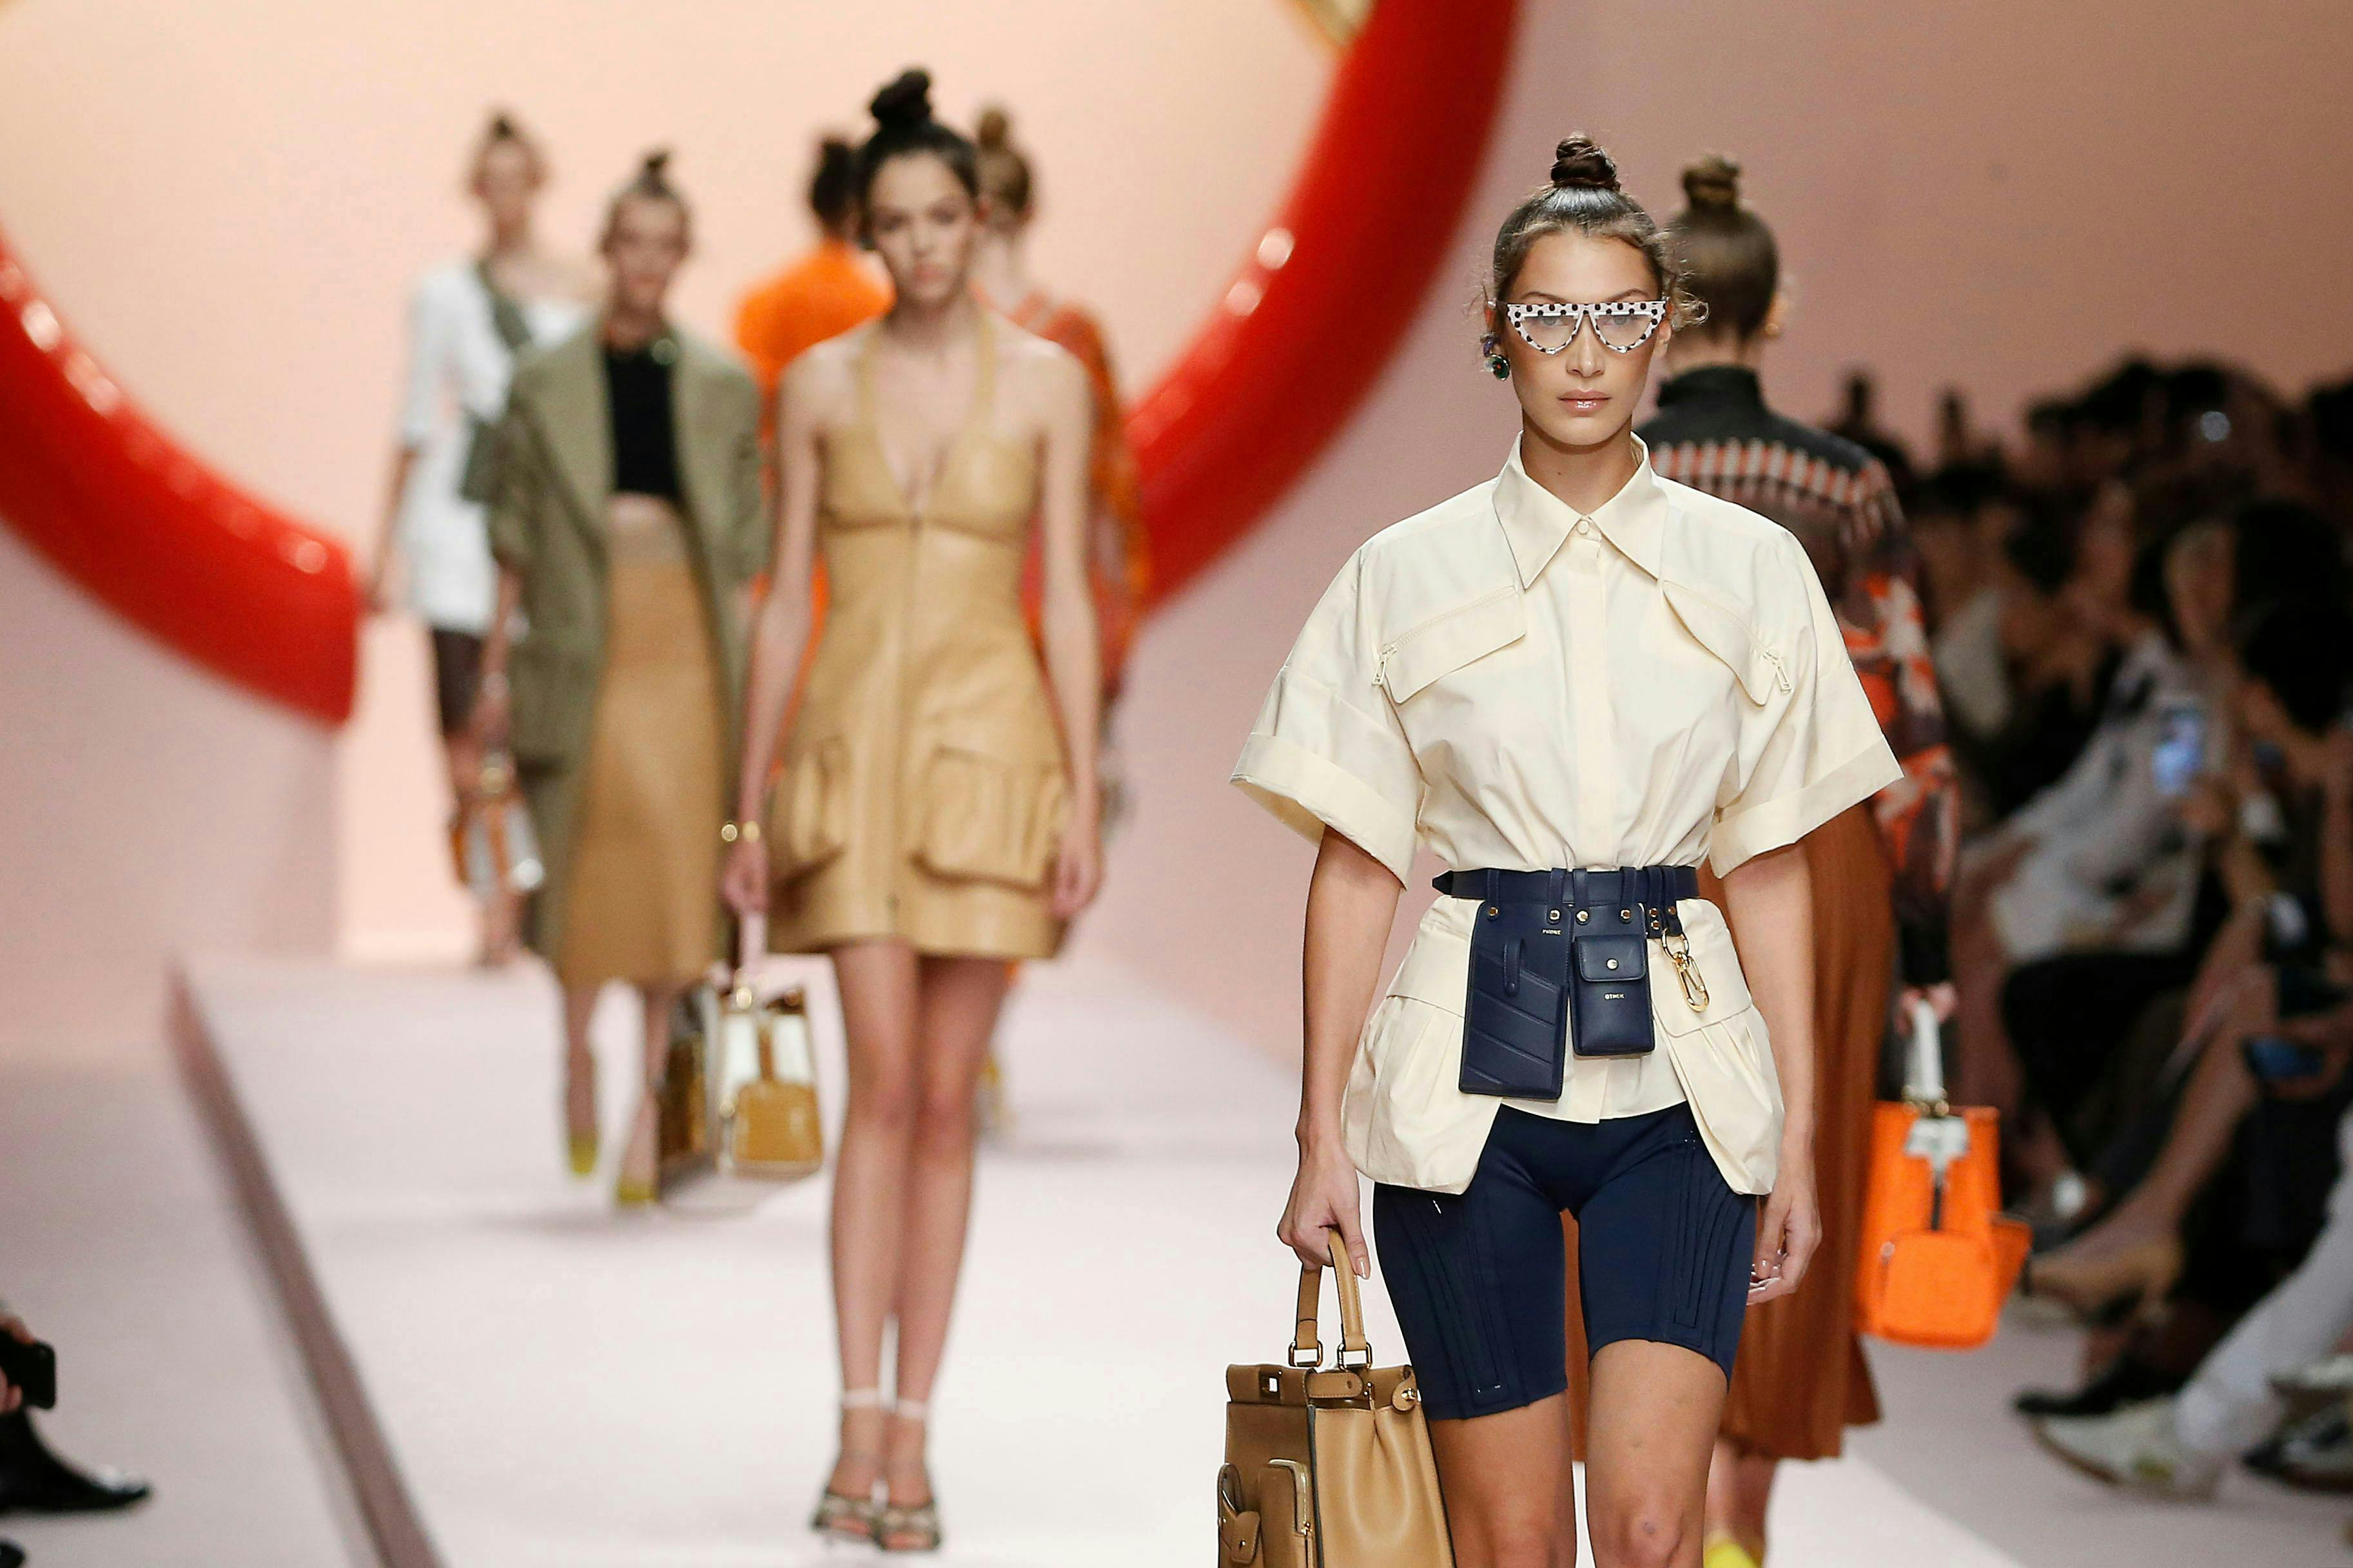 fendi show runway spring summer 2019 milan fashion week italy 20 sep 2018 bella hadid catwalk mfw ss19 model modelling female with others personality socialite 74675285 person human clothing apparel